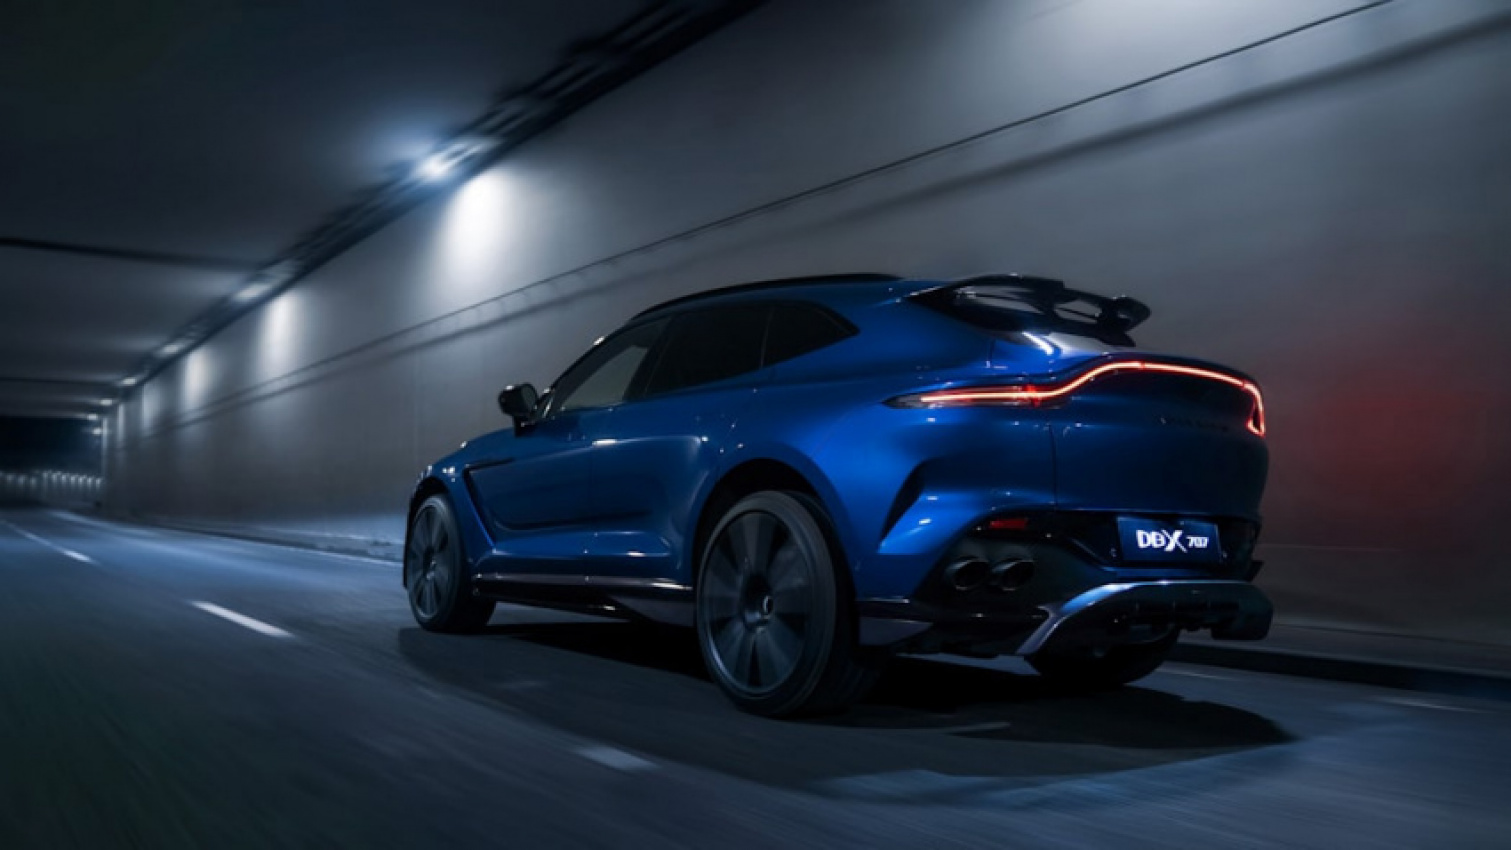 aston martin, autos, cars, convertible, coupe, crossover, electric, future vehicles, green, hybrid, luxury, performance, aston martin's front-engined sports cars getting big upgrades for 2023